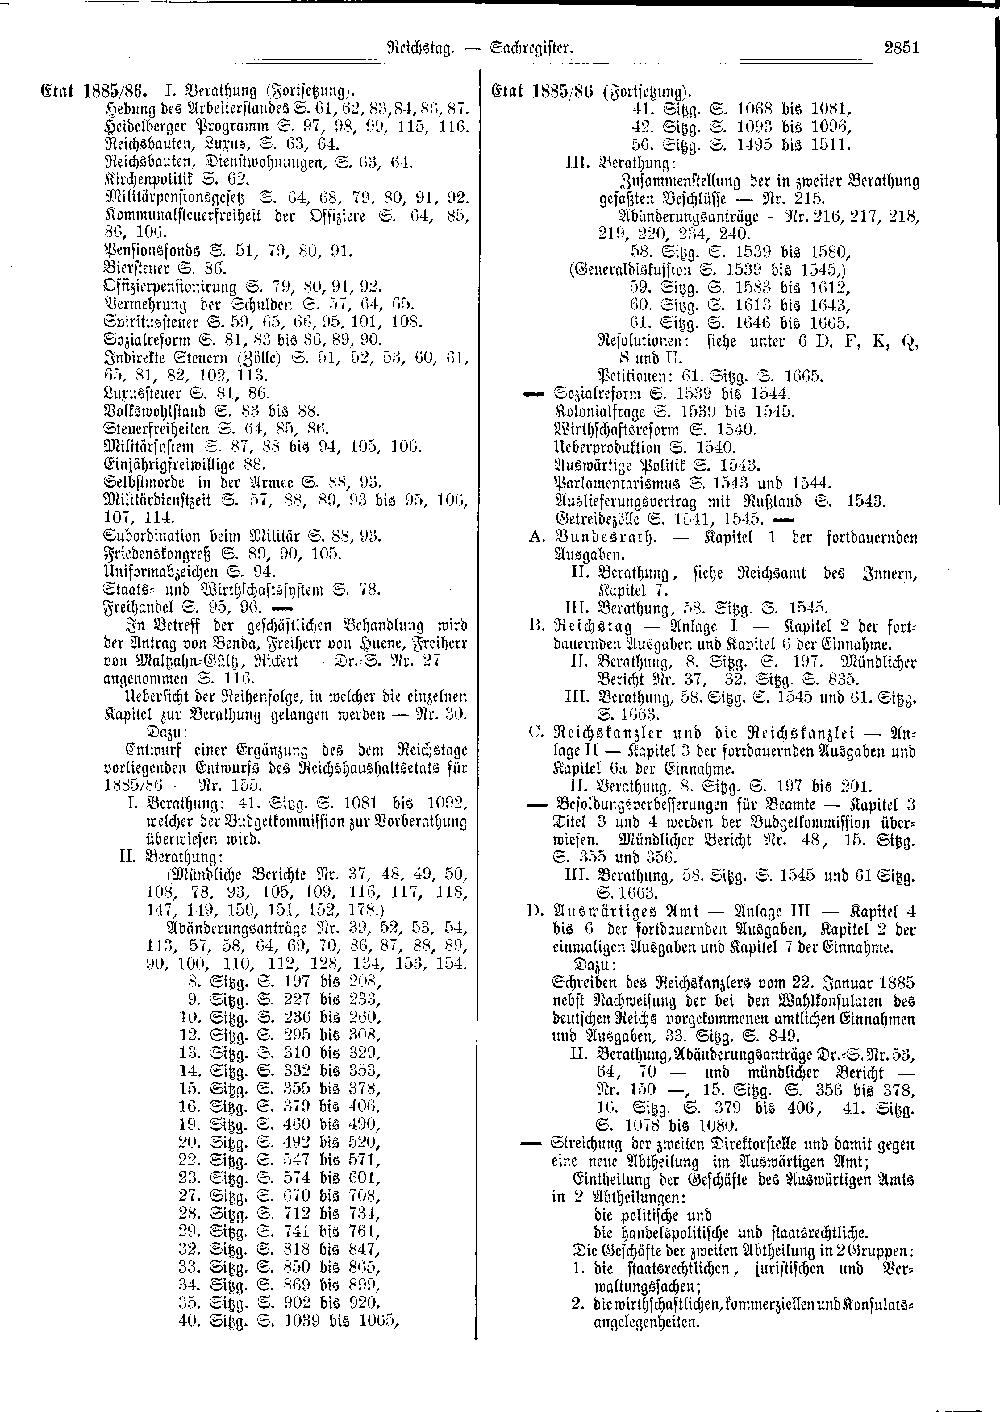 Scan of page 2851